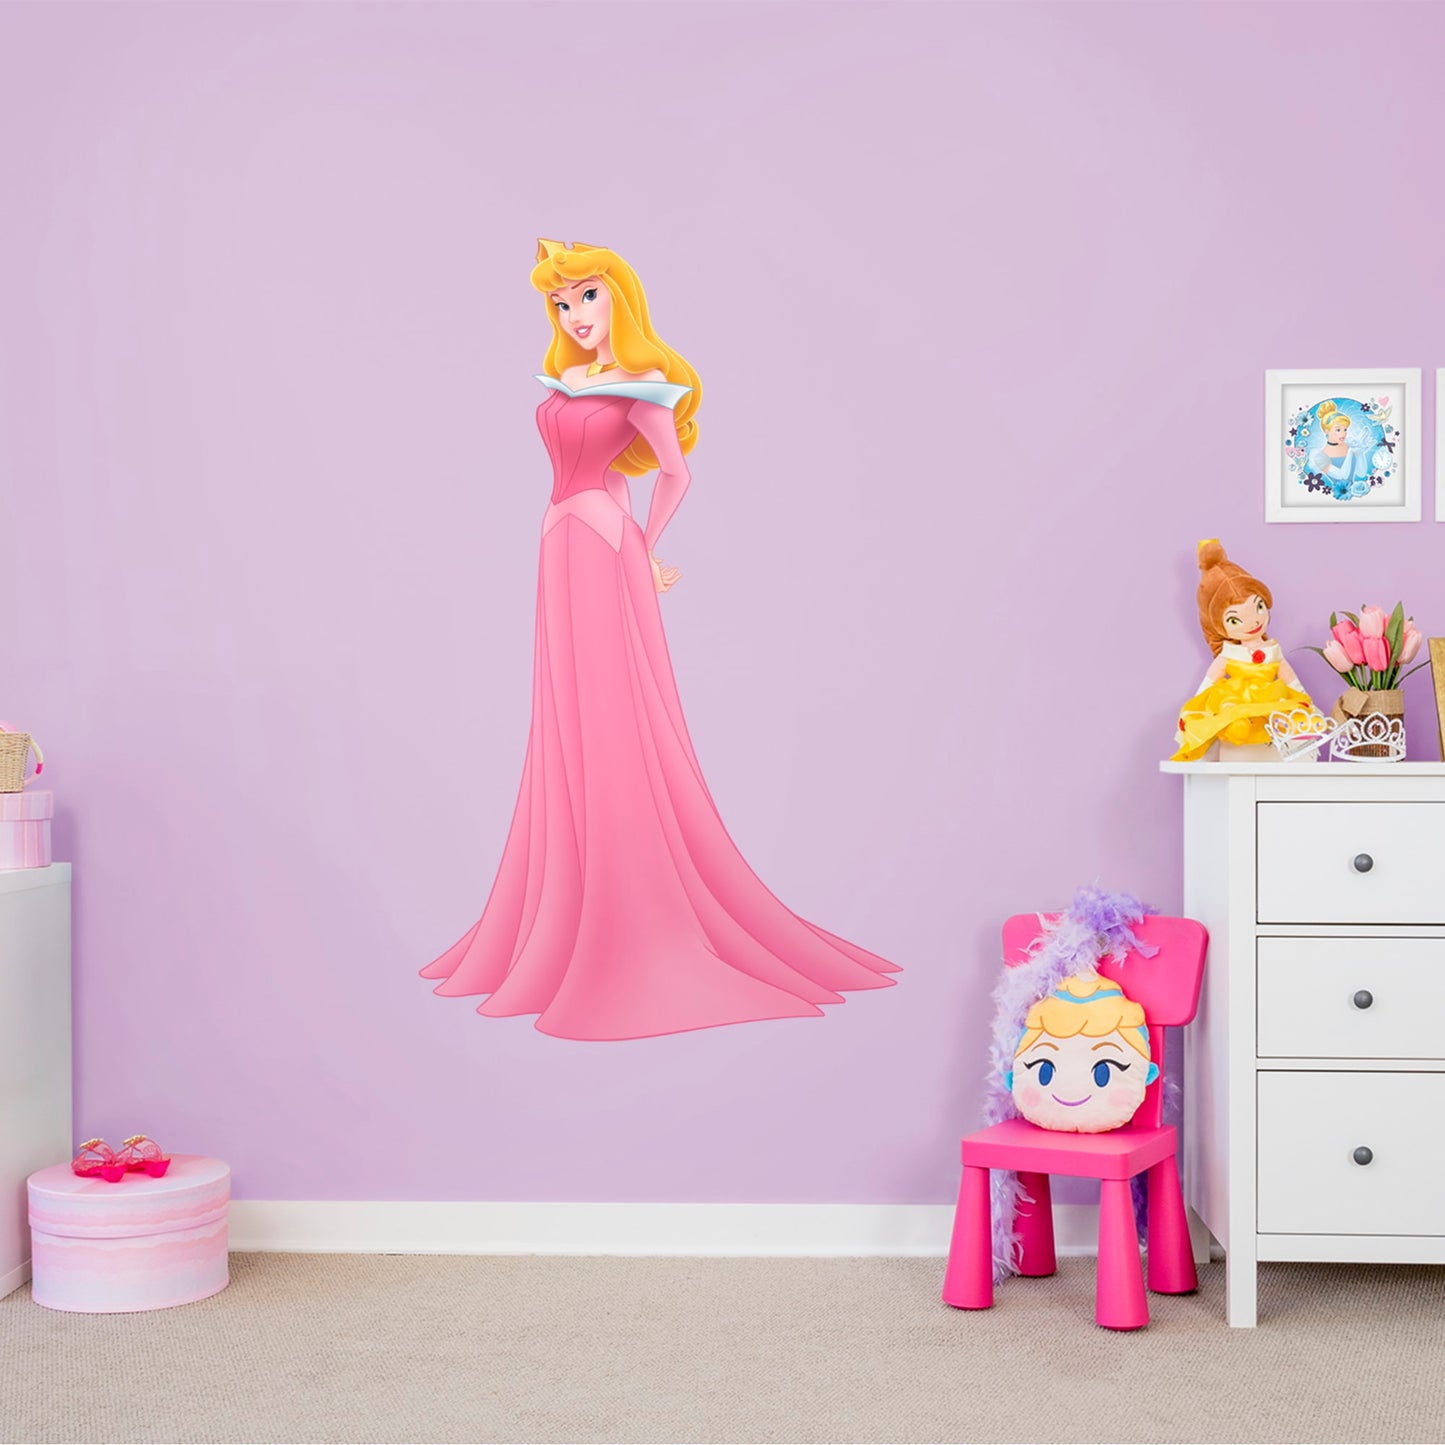 Sleeping Beauty - Officially Licensed Disney Removable Wall Decal